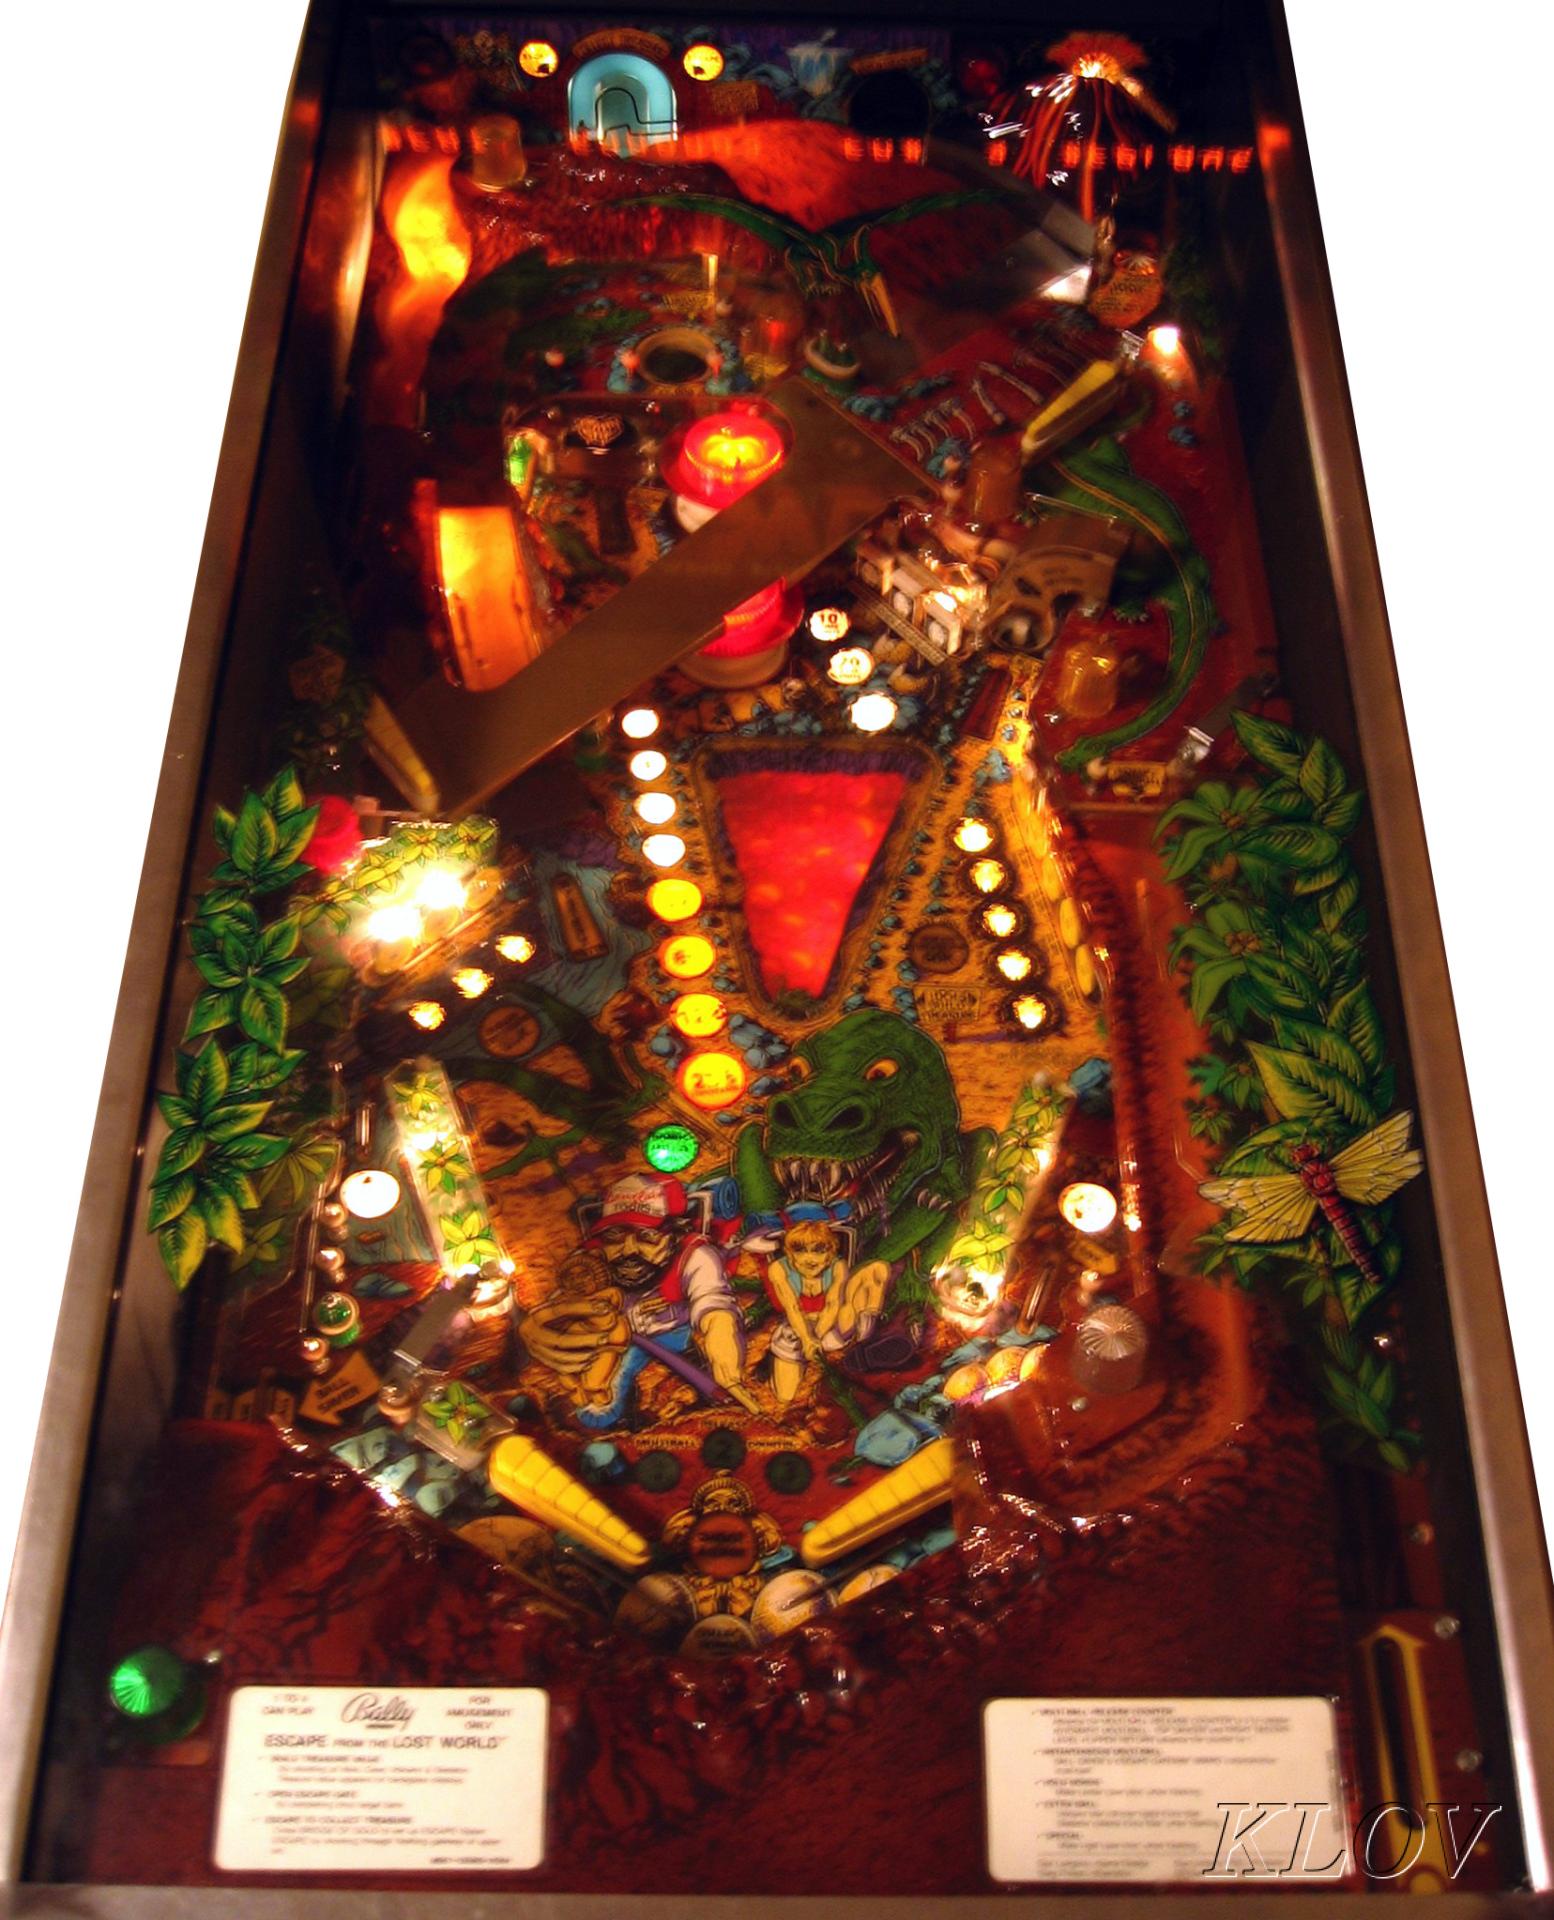 escape from the lost world pinball